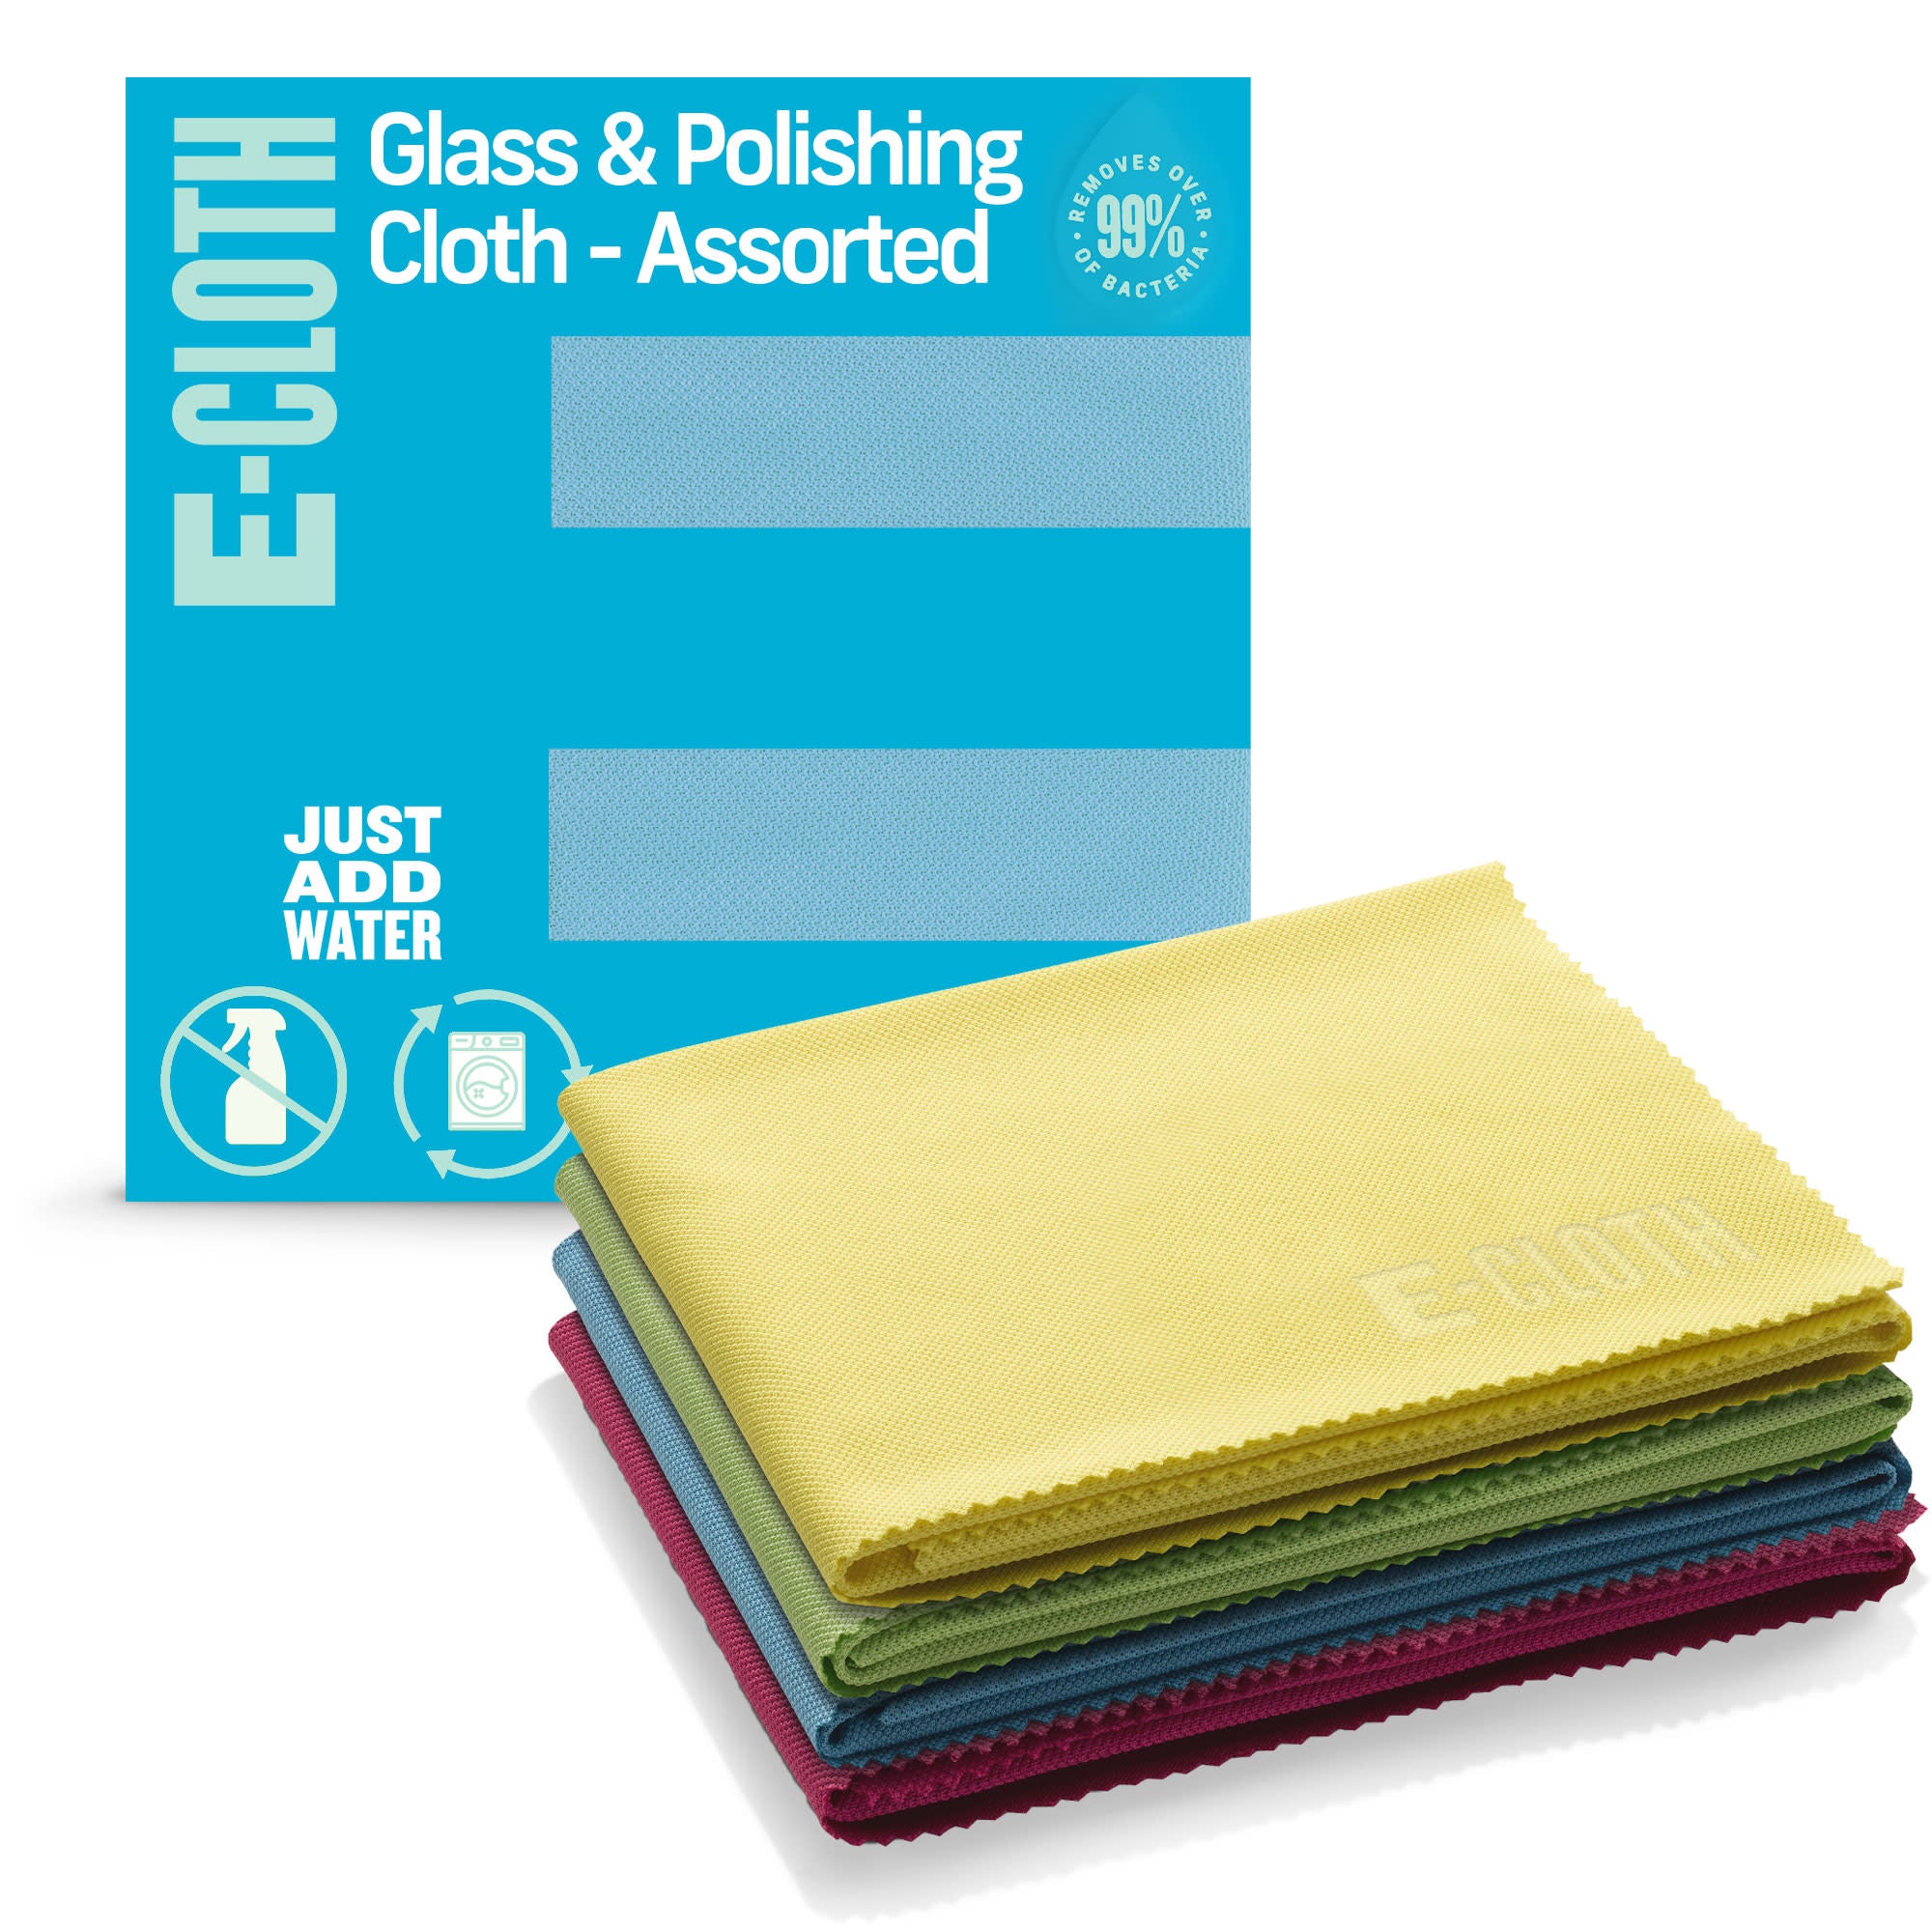 Image of Glass & Polishing Cloth Assorted Multipack